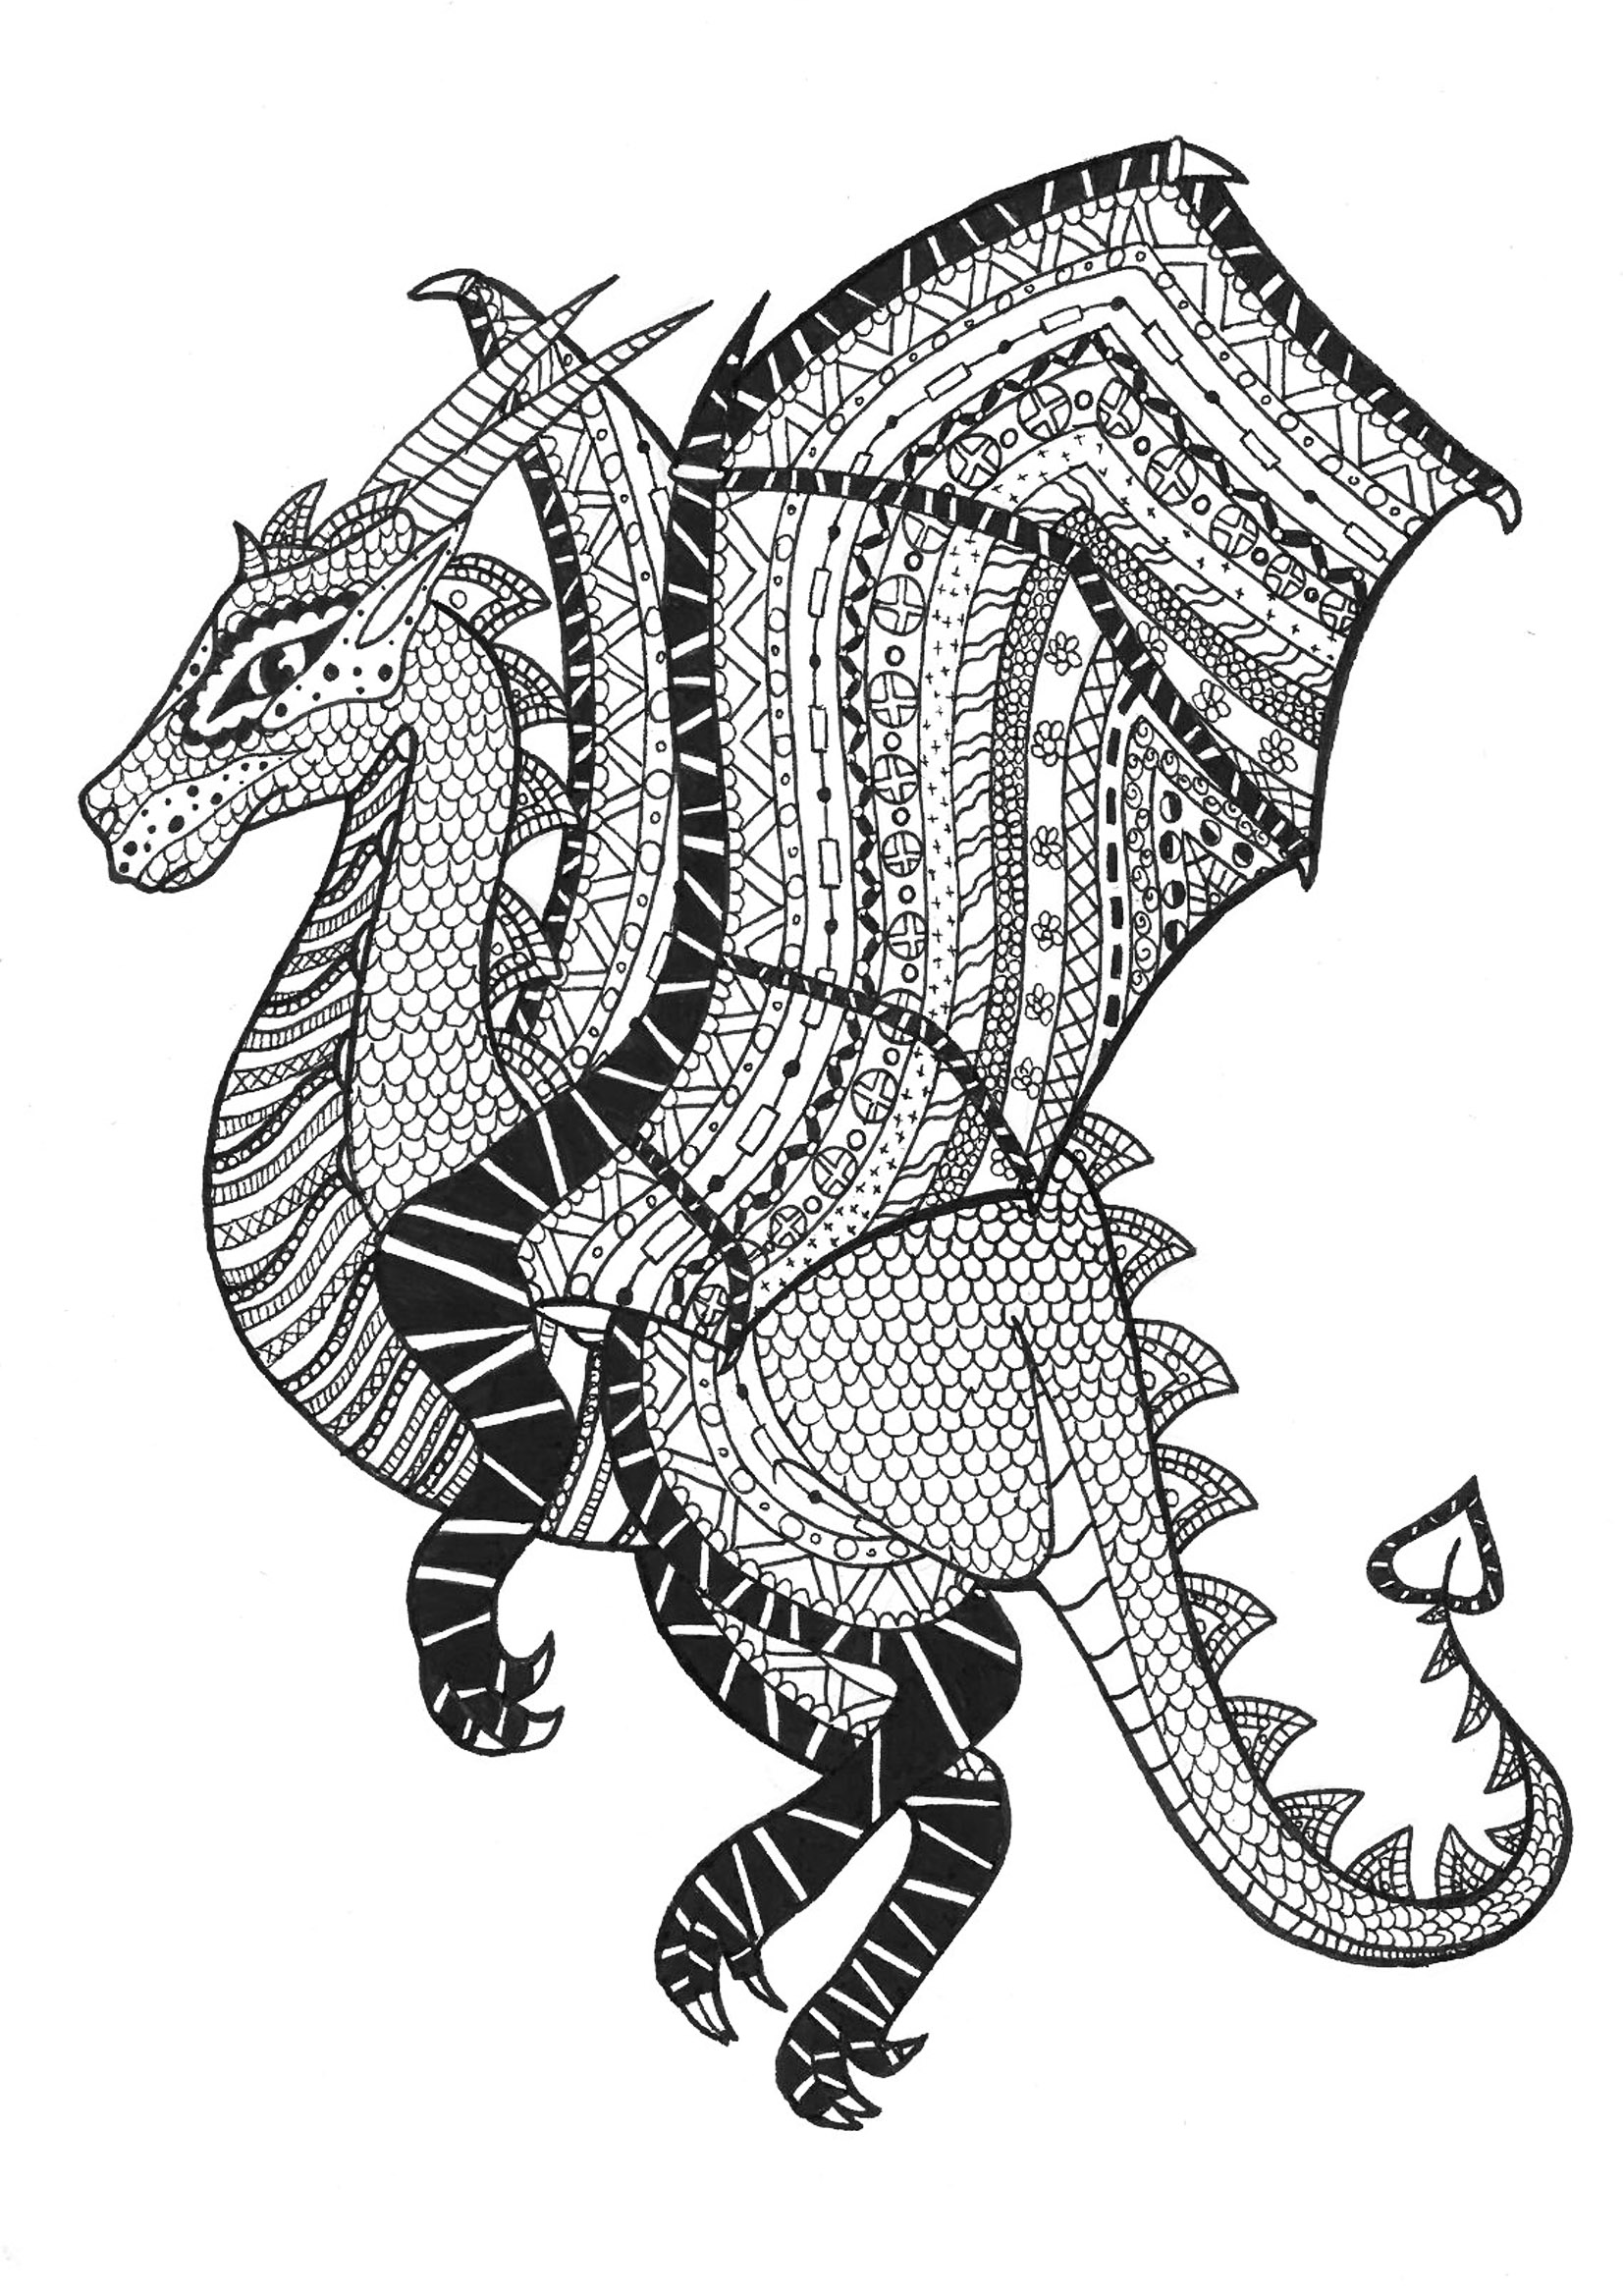 Zentangle-style dragon. Many patterns to color in the wings and body of this dragon, Artist : Rachel